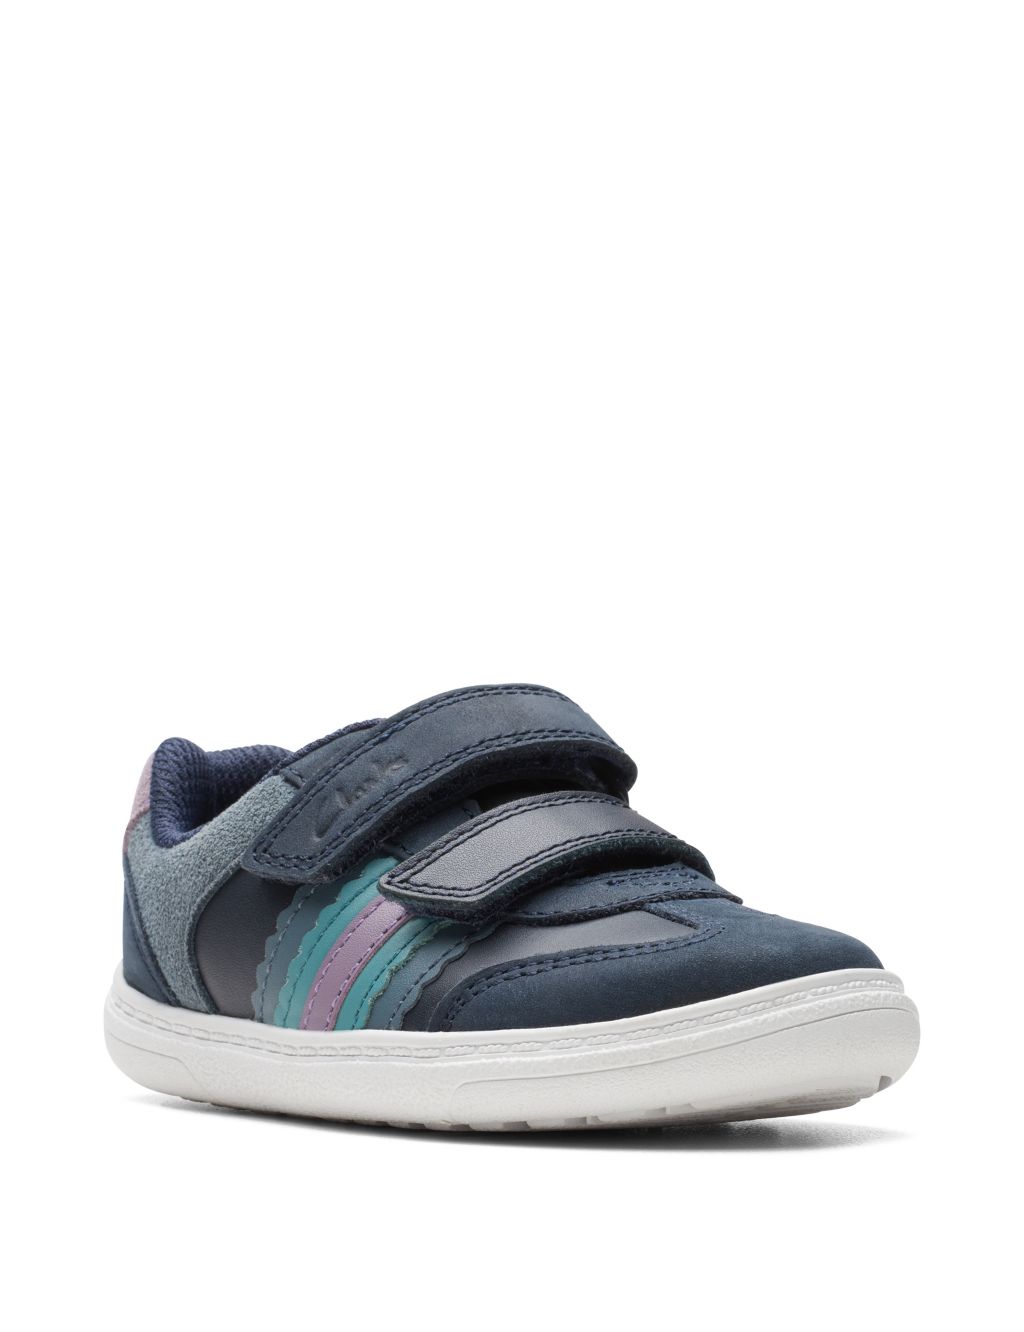 Kids' Leather Colour Block Riptape Trainers (3 Small - 6 ½ Small) image 2